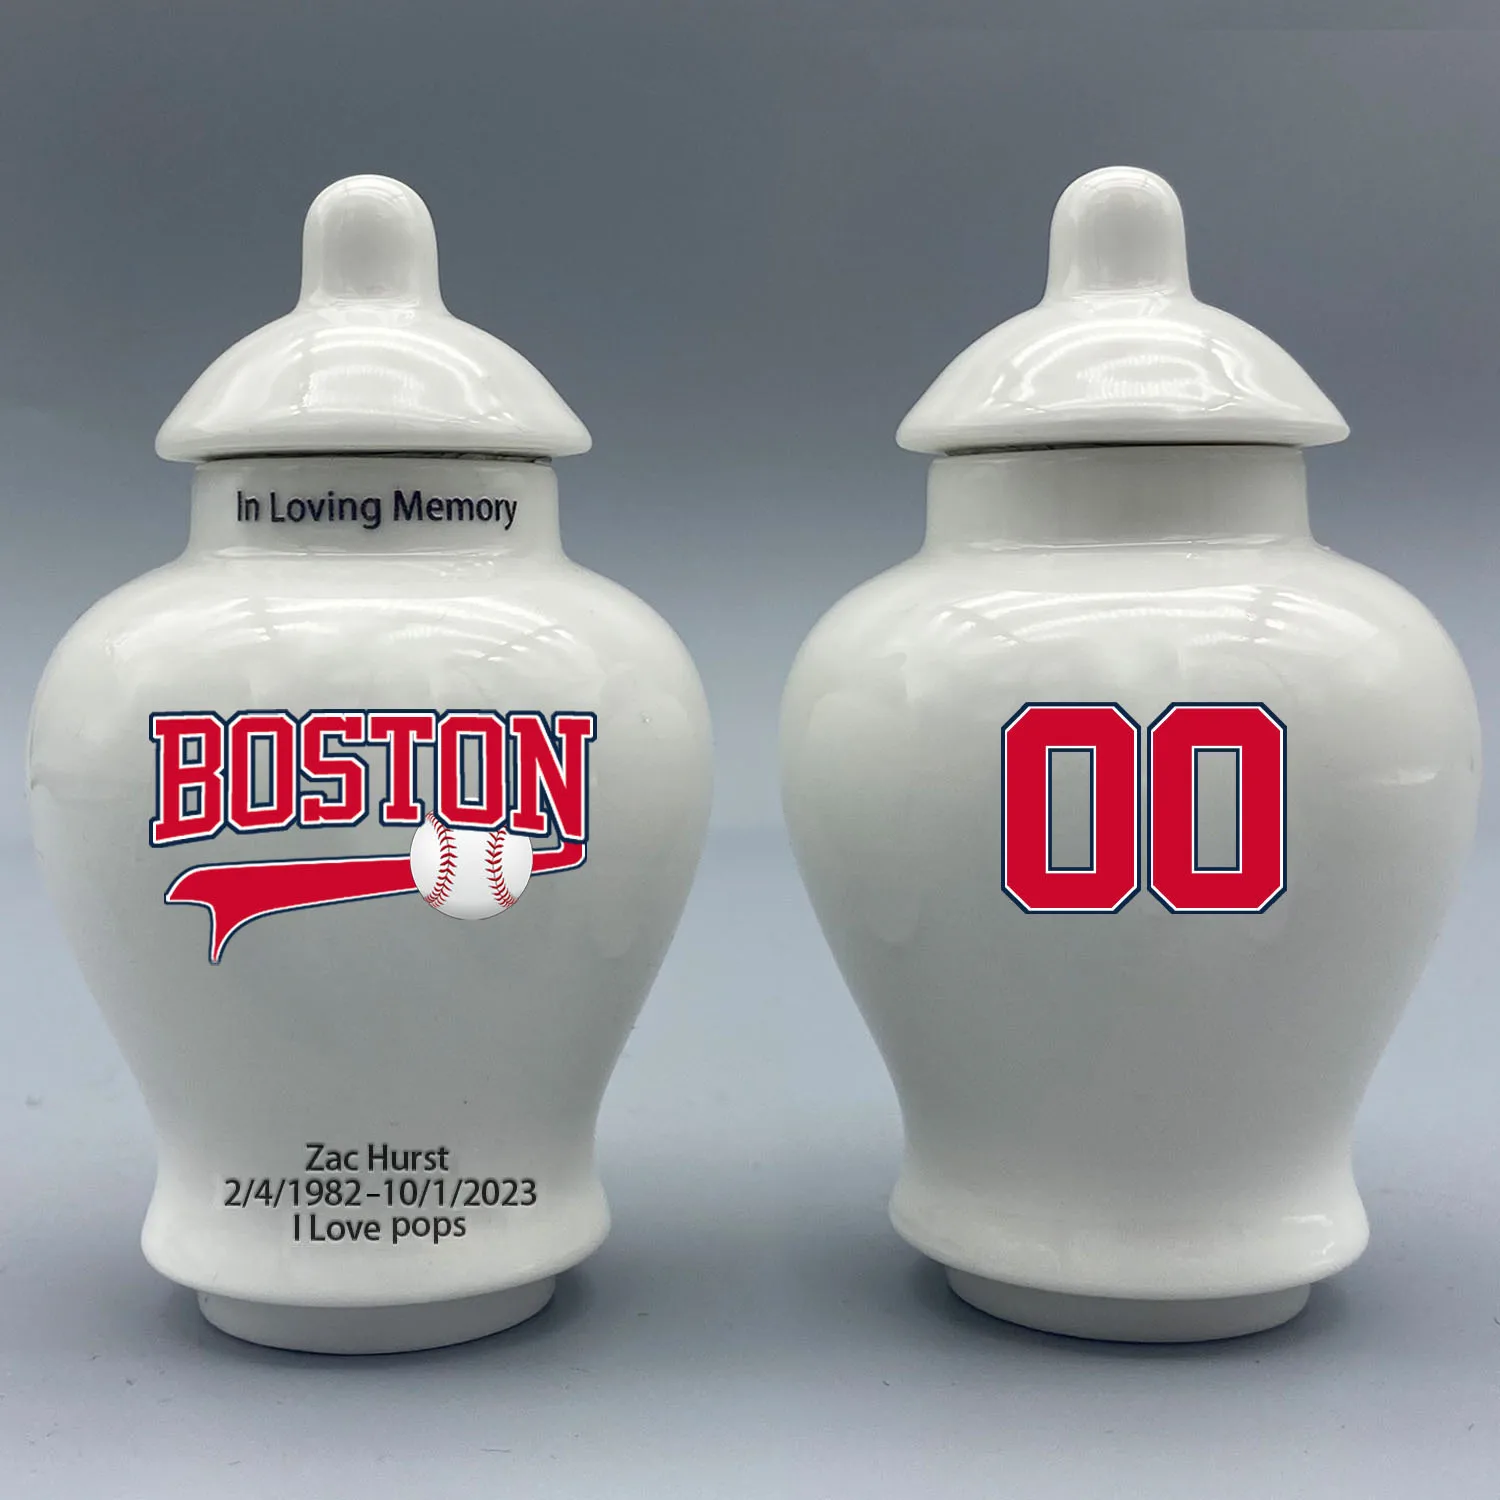 

Mini Urn for Boston Red Sox-Baseball themed.Please send me the customization information - name/date and number on the urn